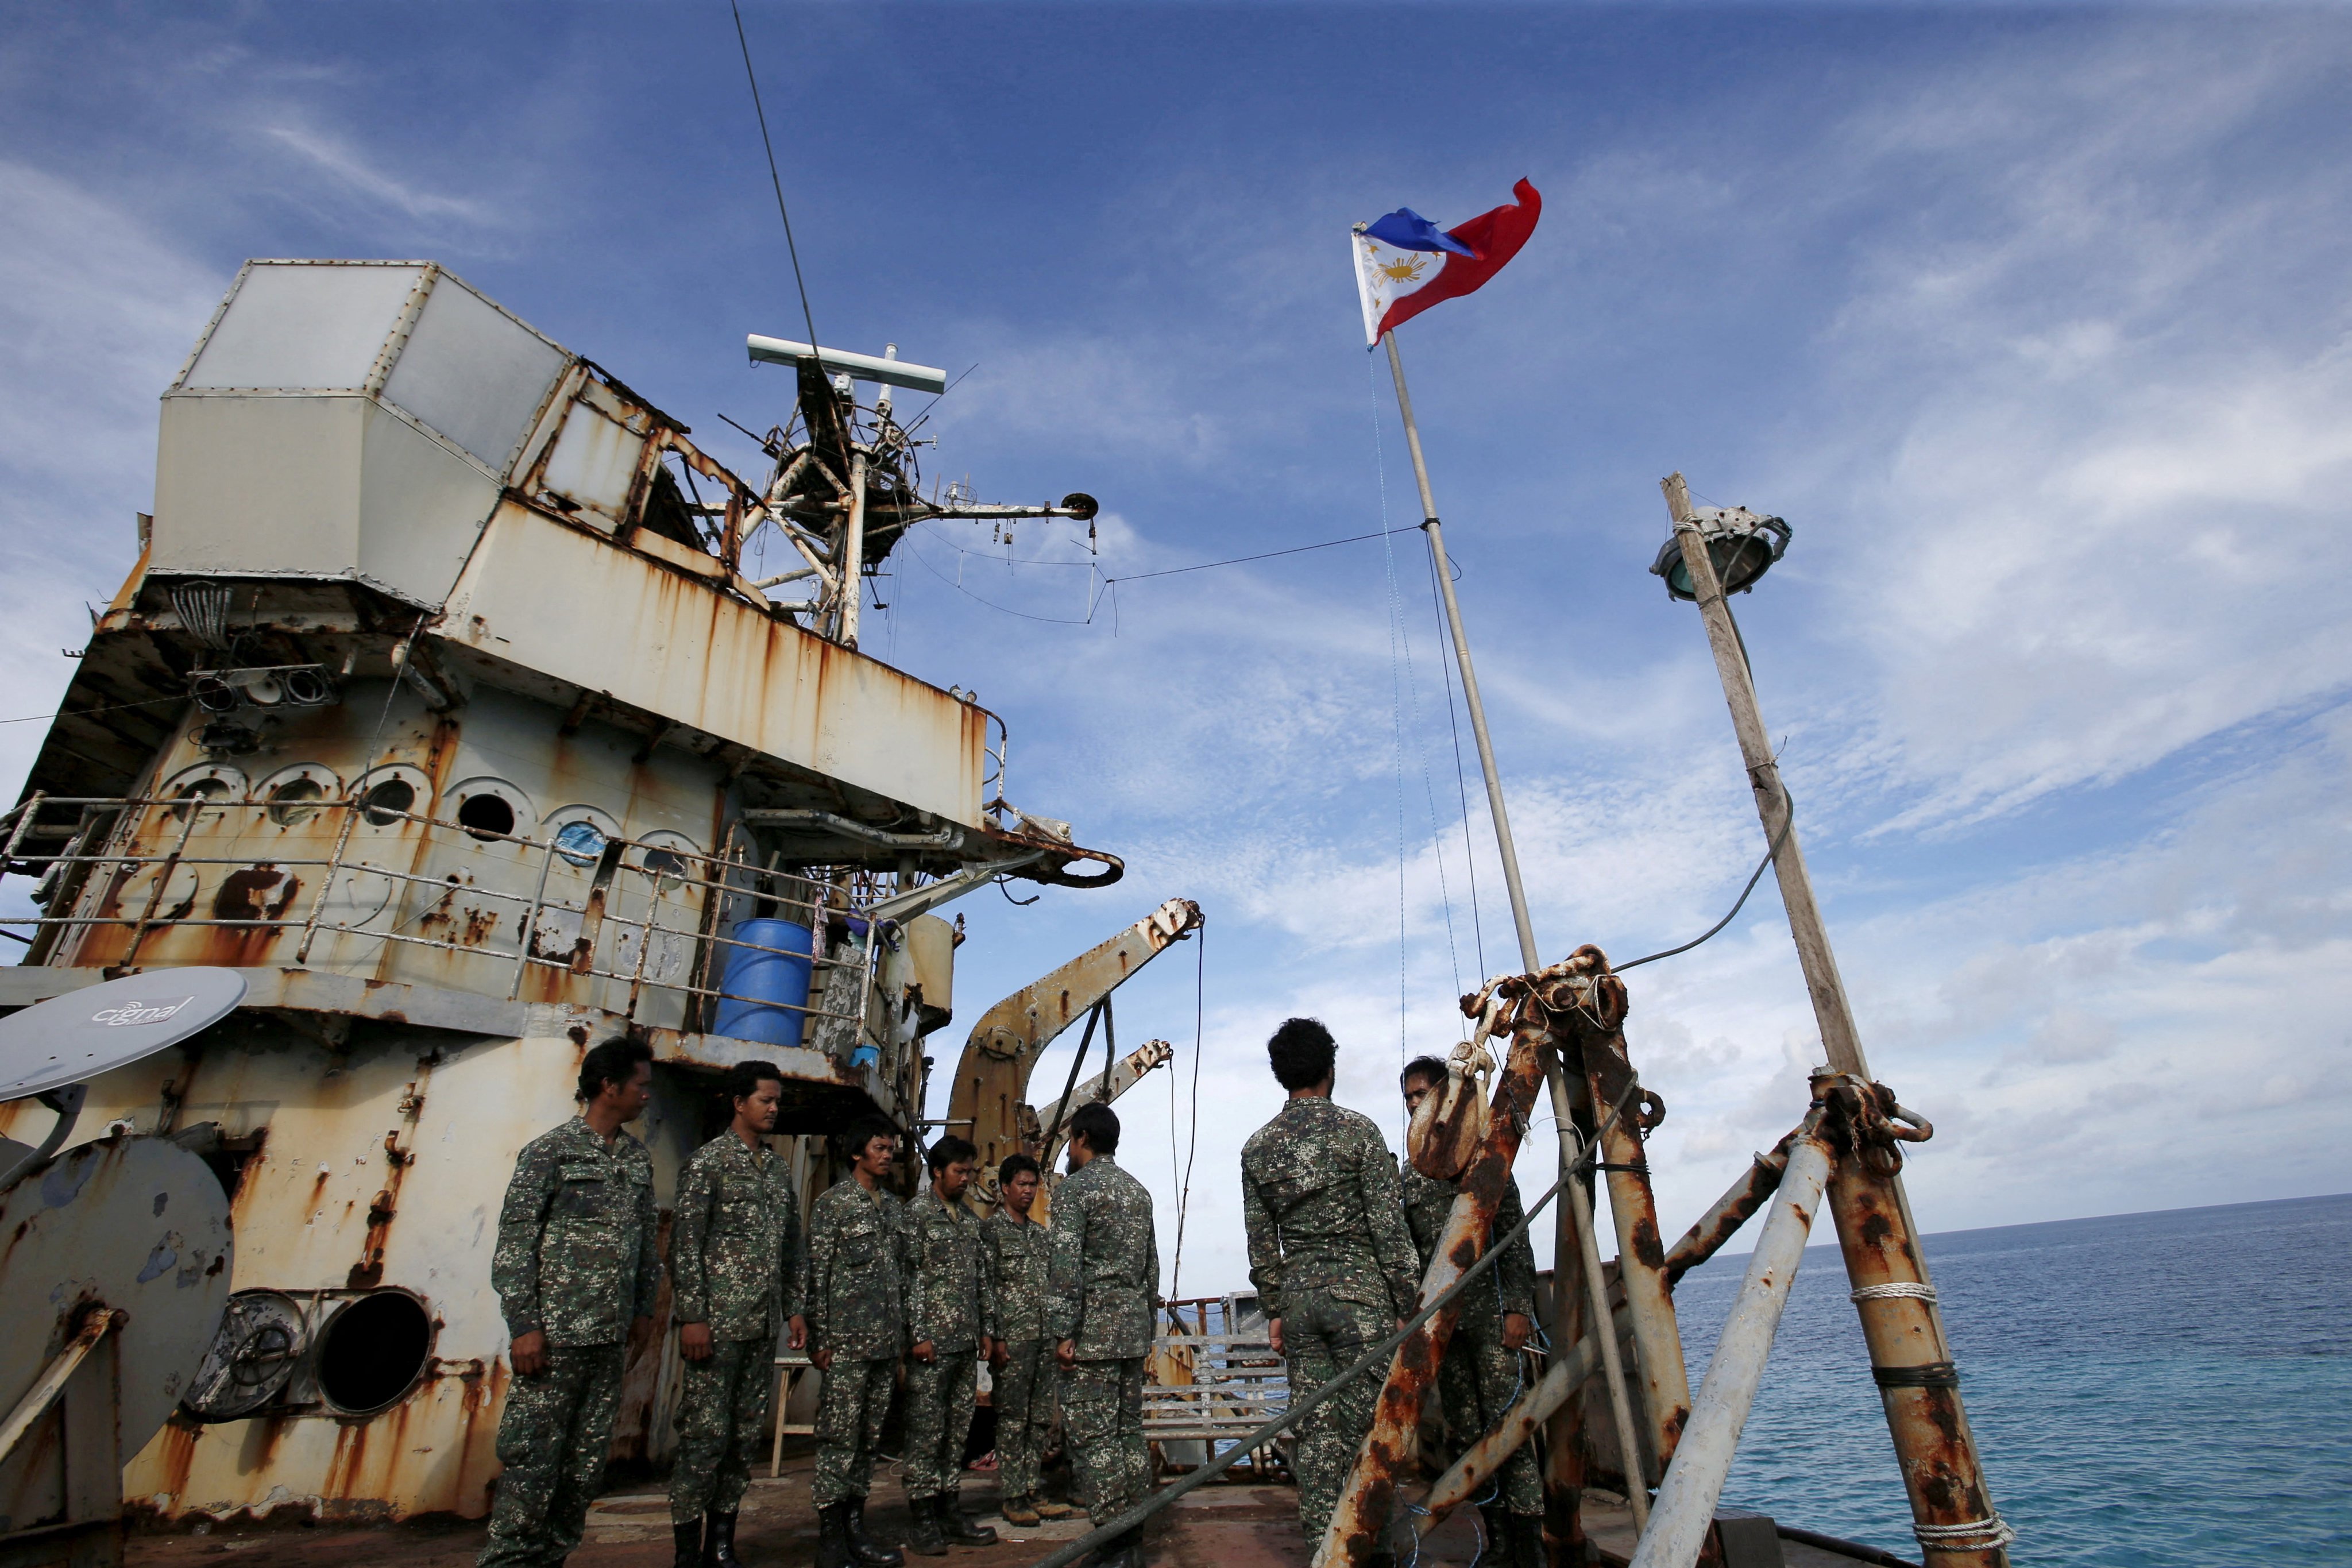 Philippine Marines are seen on BRP Sierra Madre, a dilapidated Philippine Navy ship, on March 29, 2014. The ship was run aground in 1999 and became a Philippine military detachment on the disputed Second Thomas Shoal, part of the Spratly Islands chain, in the South China Sea. Photo: Reuters